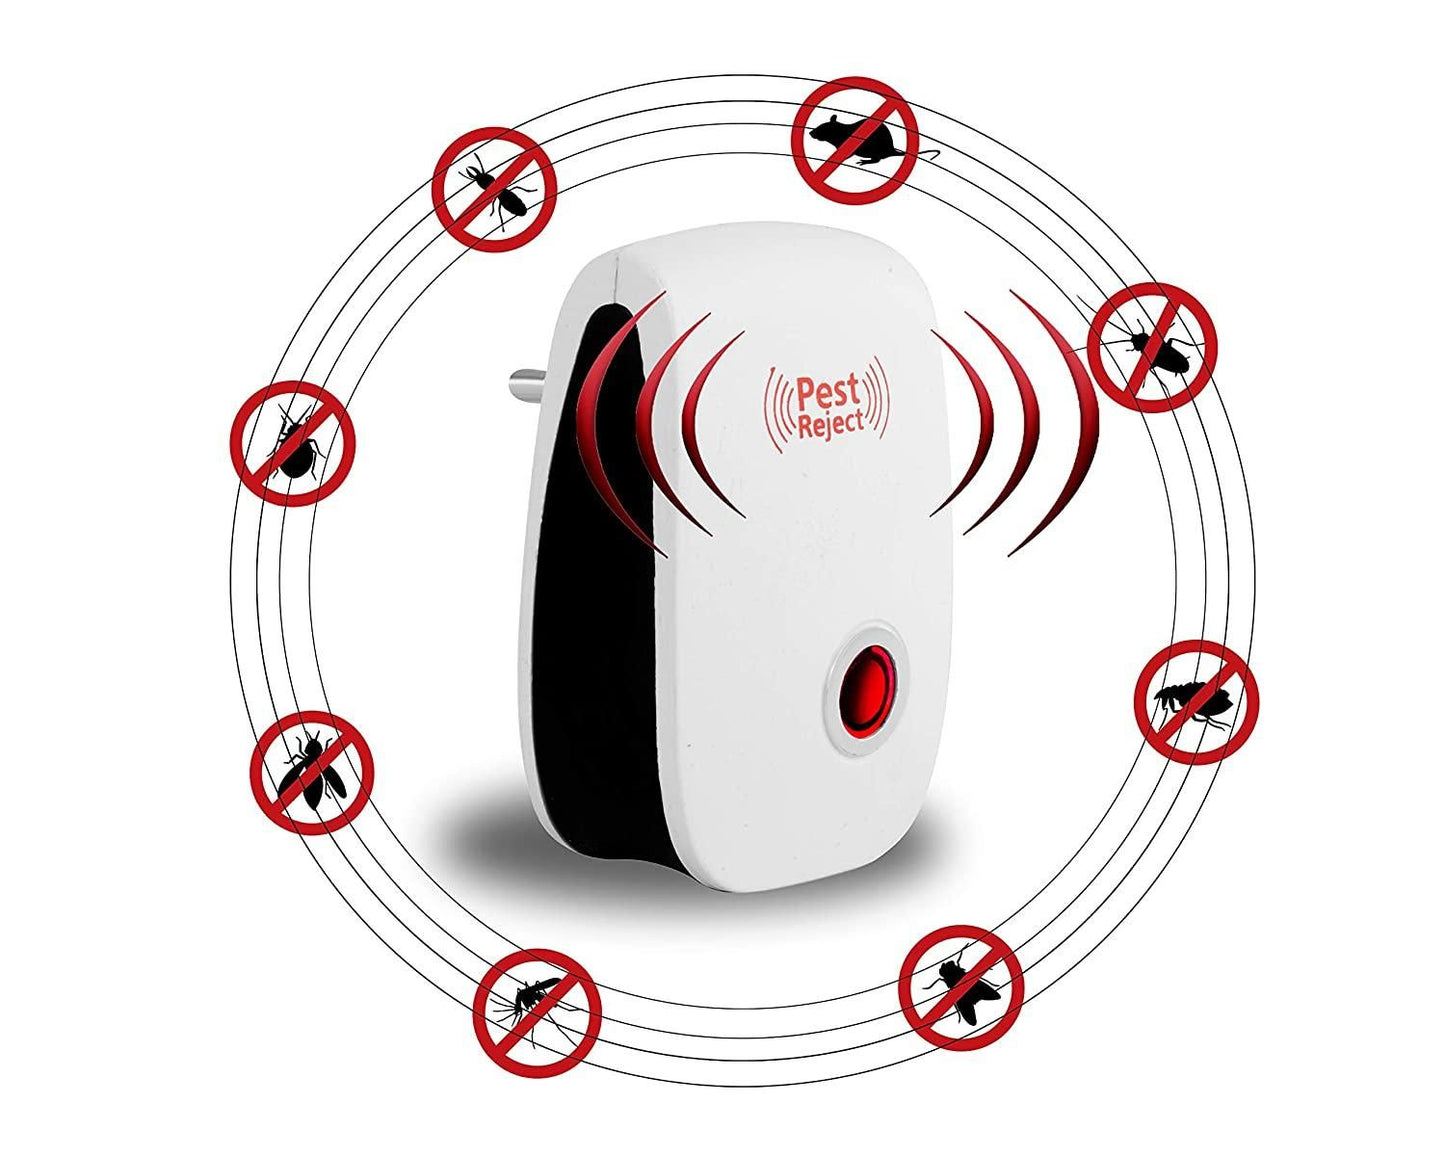 Mosquito Killer - Ultrasonic Pest Repeller For Rat, Mice, Cockroach, Insects, Ants, Mosquito Reject